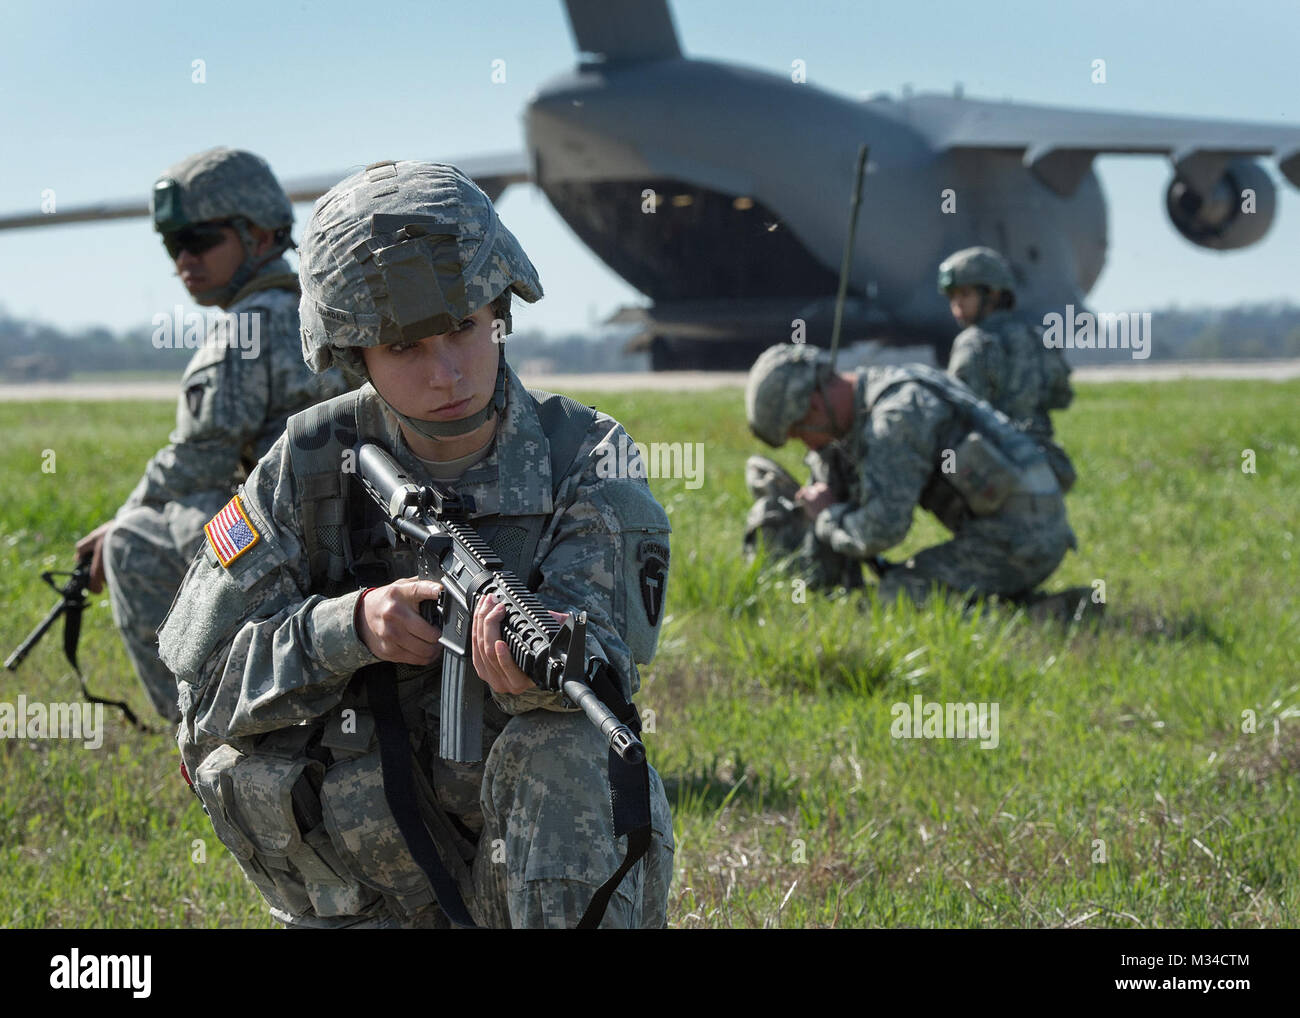 Pfc. Angela Warden from the 1st Battalion, 143rd Infantry Regiment (Airborne), provides cover for her security team during a training mission at North Texas Regional Airport in Grayson County March 28, 2015. The Austin-based Texas Army National Guard unit conducted the assault landing from a C-17 'Globemaster' at the civilian airport near Sherman, Texas. (U.S. Army National Guard photo by Staff Sgt. Mark Scovell) 36th Infantry Division Airborne Assault Landing Training by Texas Military Department Stock Photo